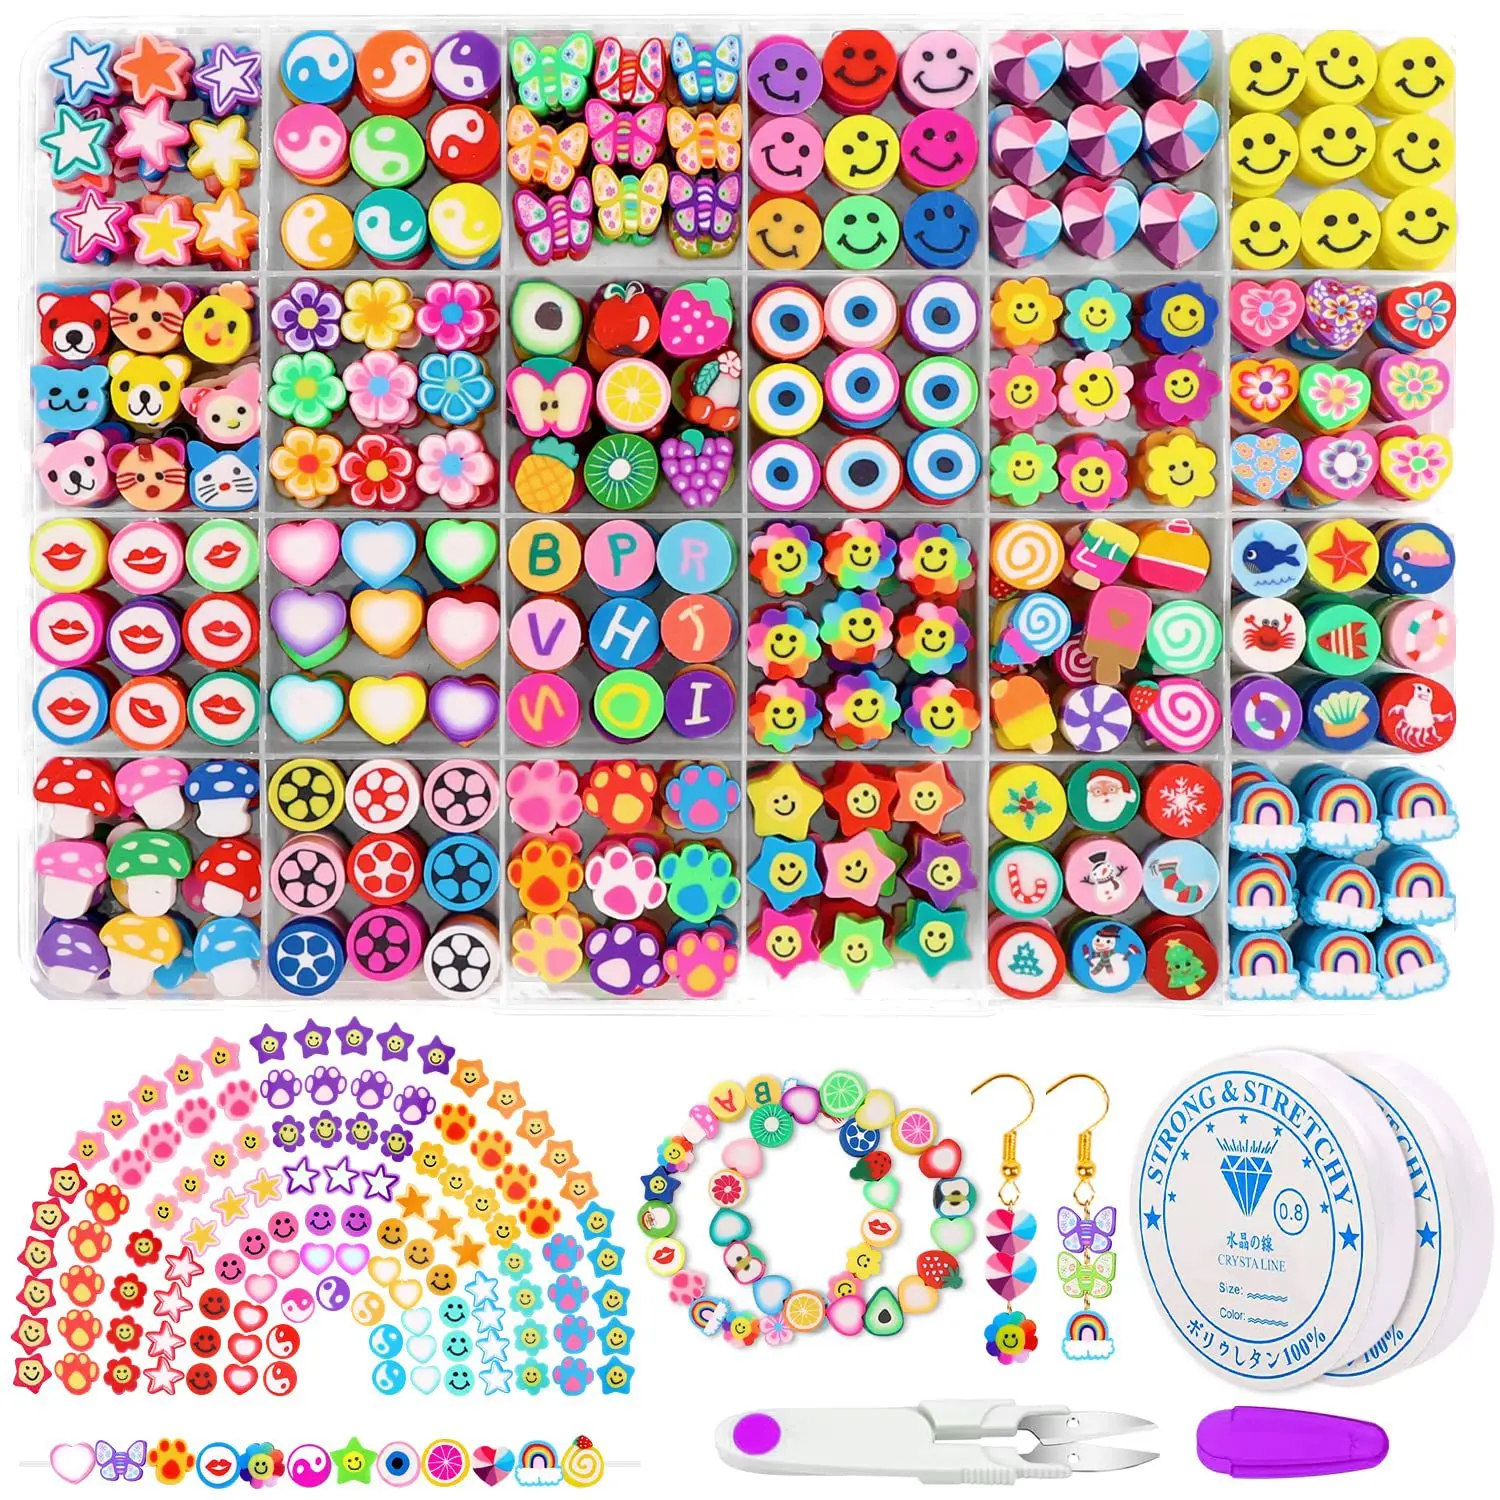 10MM Cute Clay Polymer Beads Set Box For Bracelet Jewelry Making DIY Accessories Charm Smiling Face Fruits Child Puzzle Bead Kit